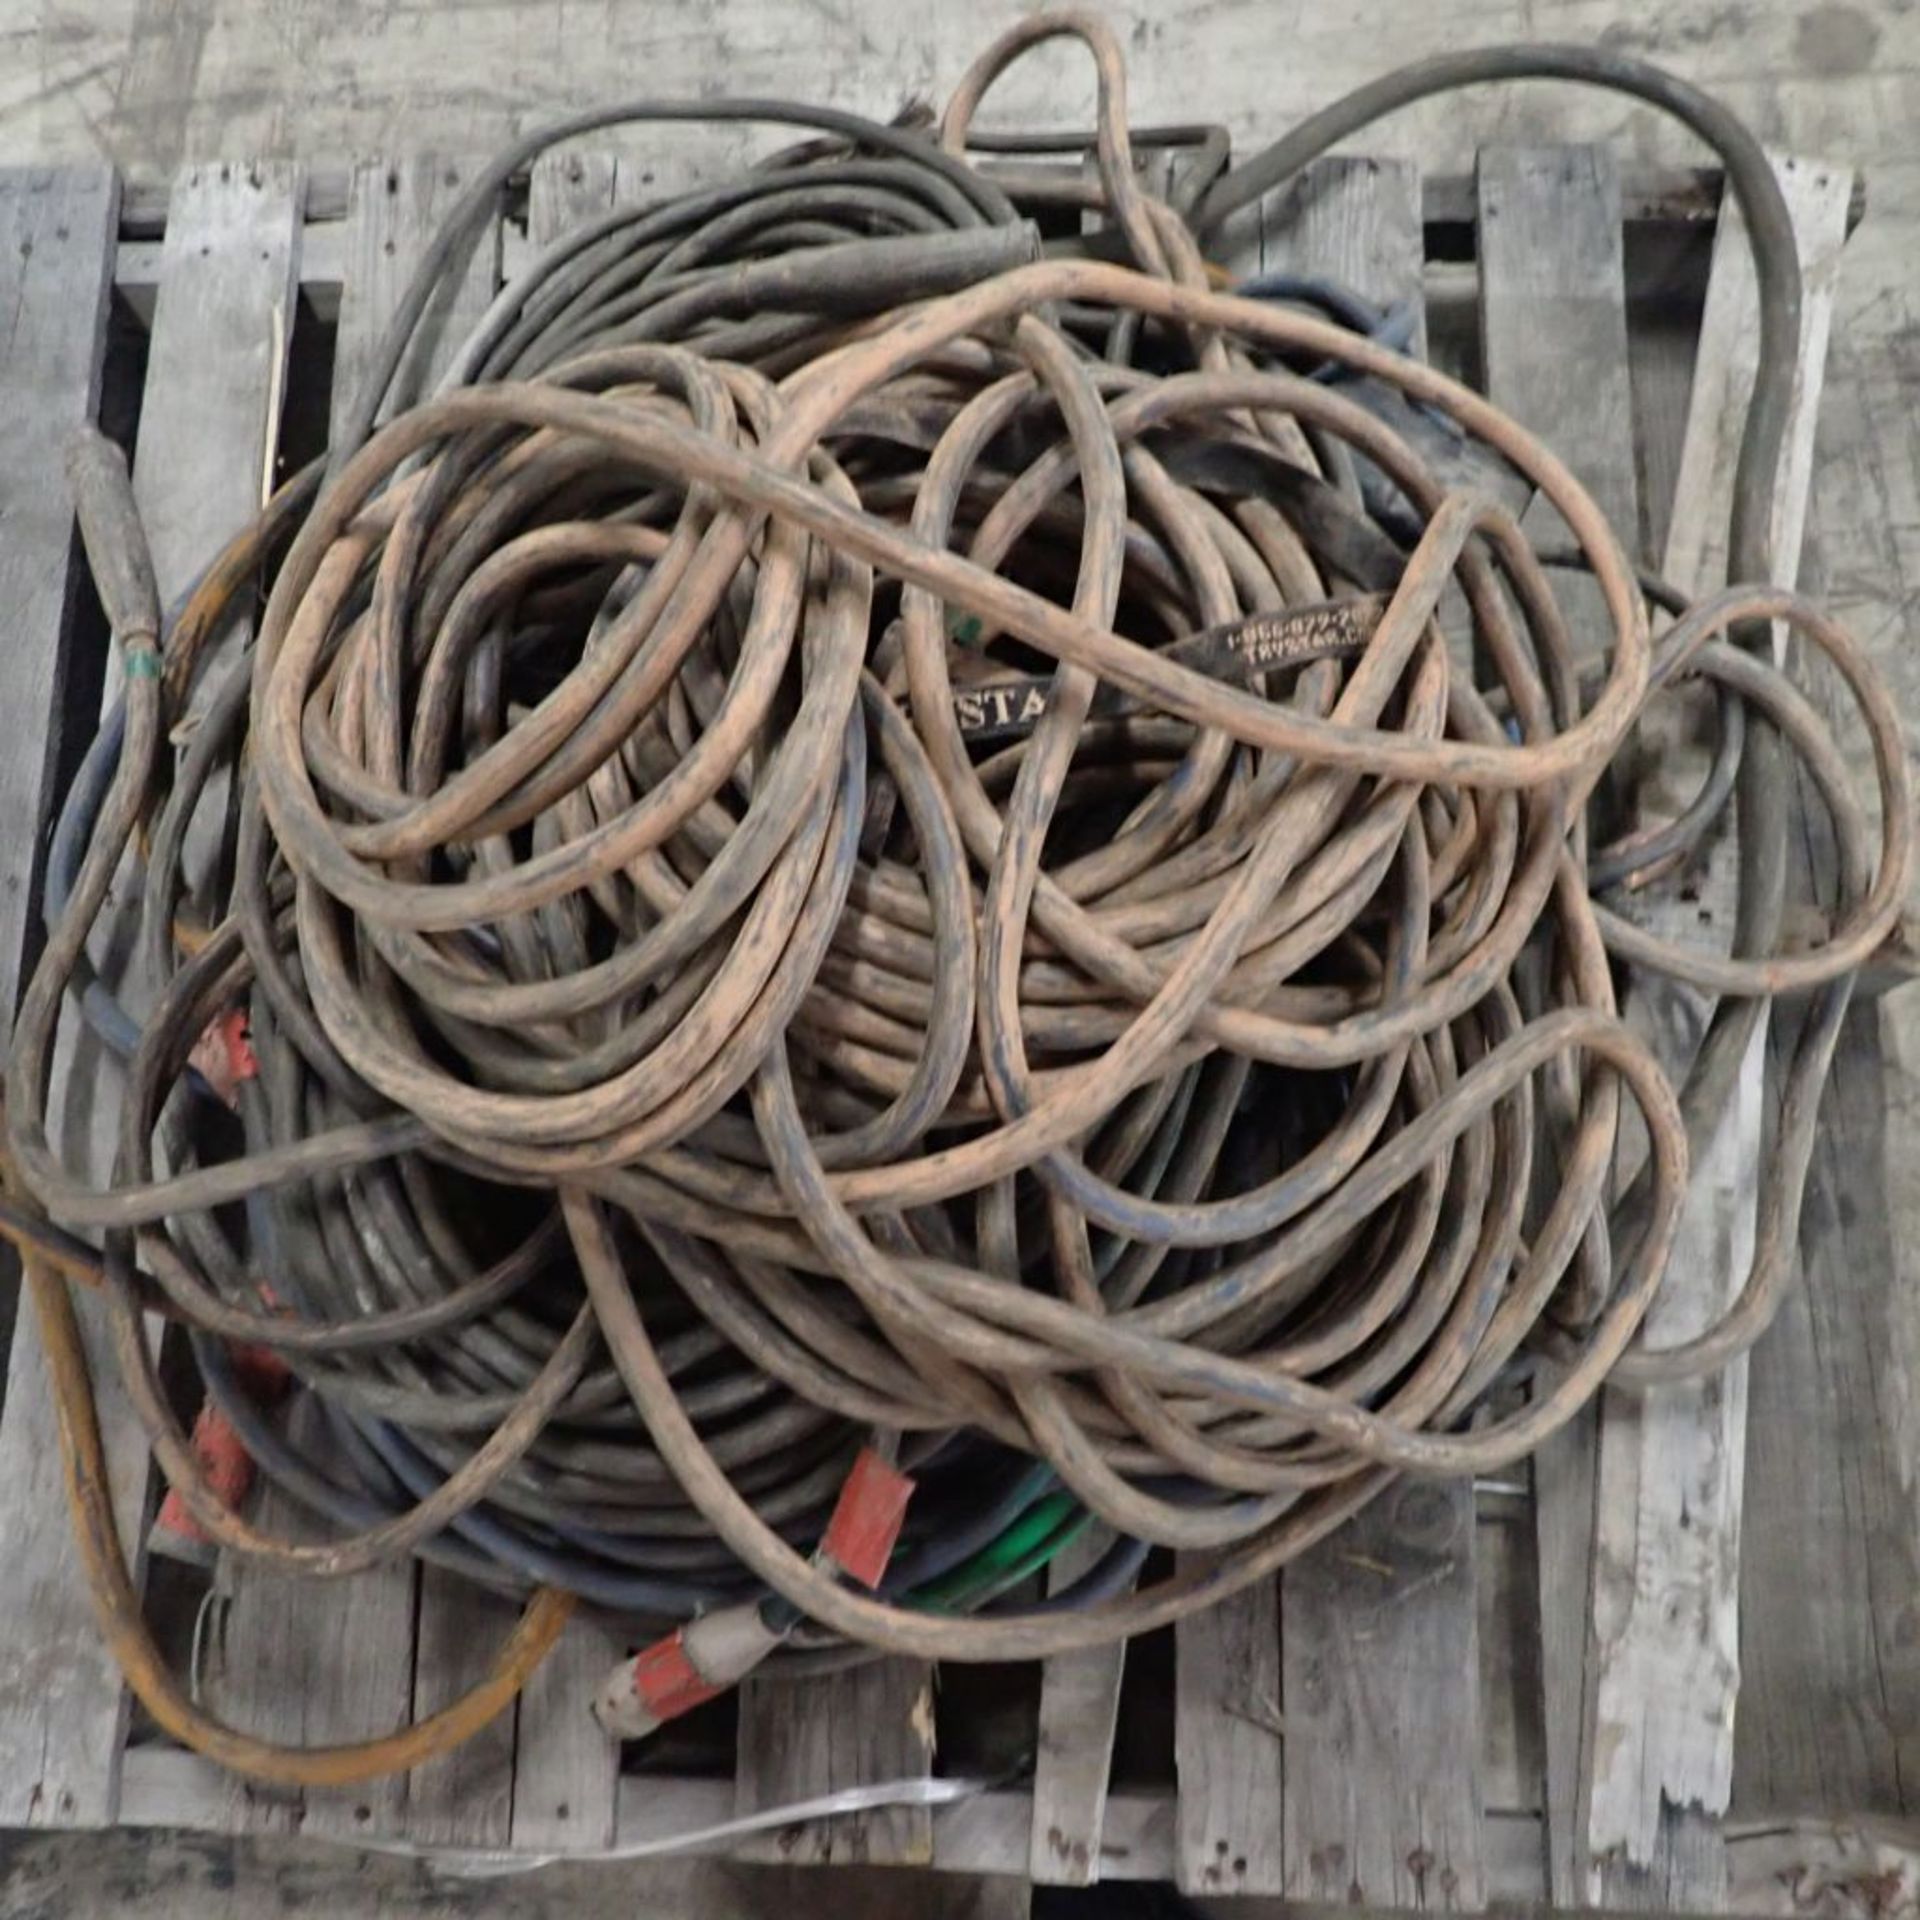 Lot of Assorted Cable Wires - Image 3 of 3